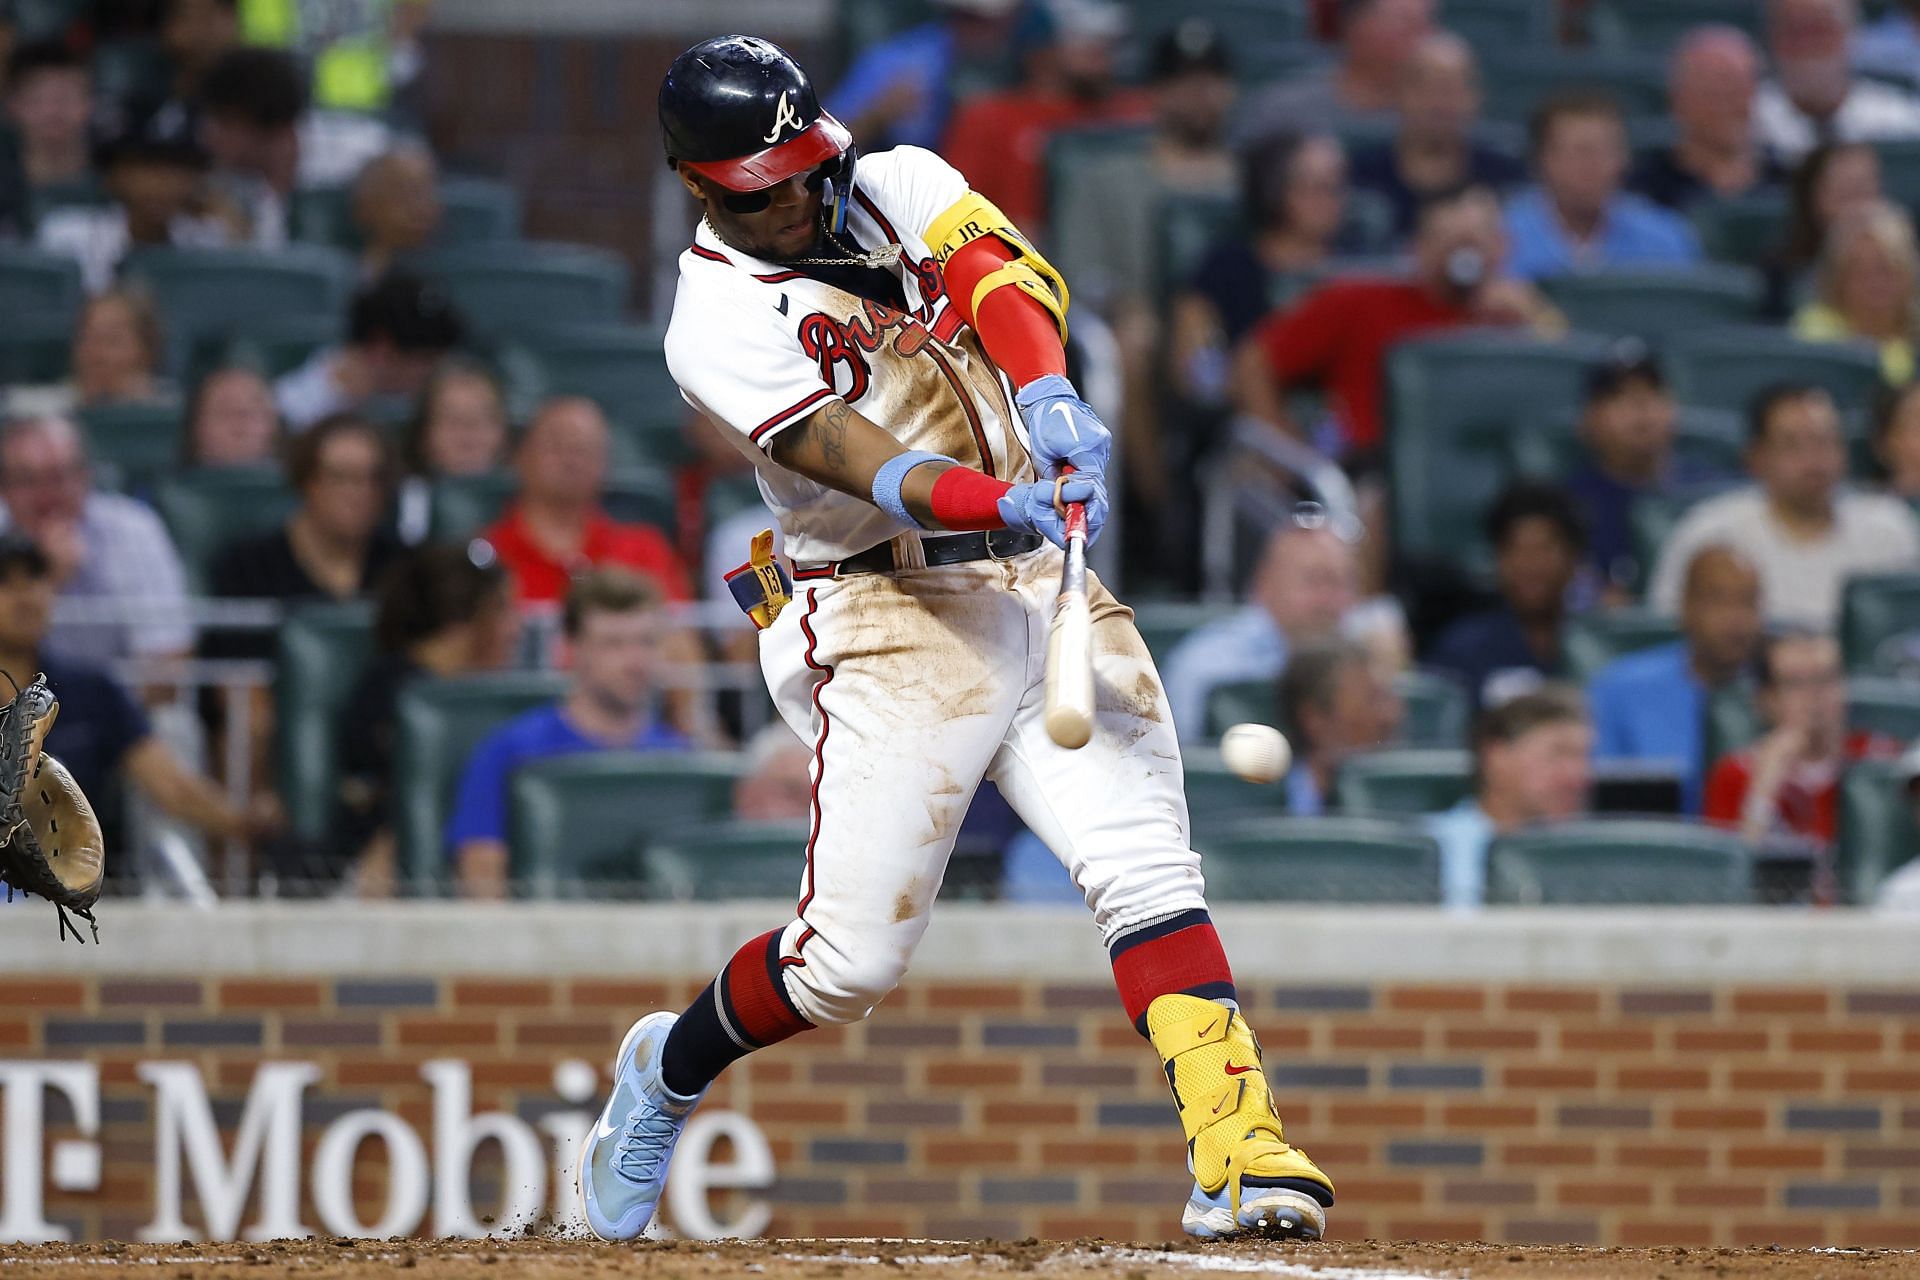 After only hitting one home run in July, it took Ronald Acuna Jr. four days into August to match that total.